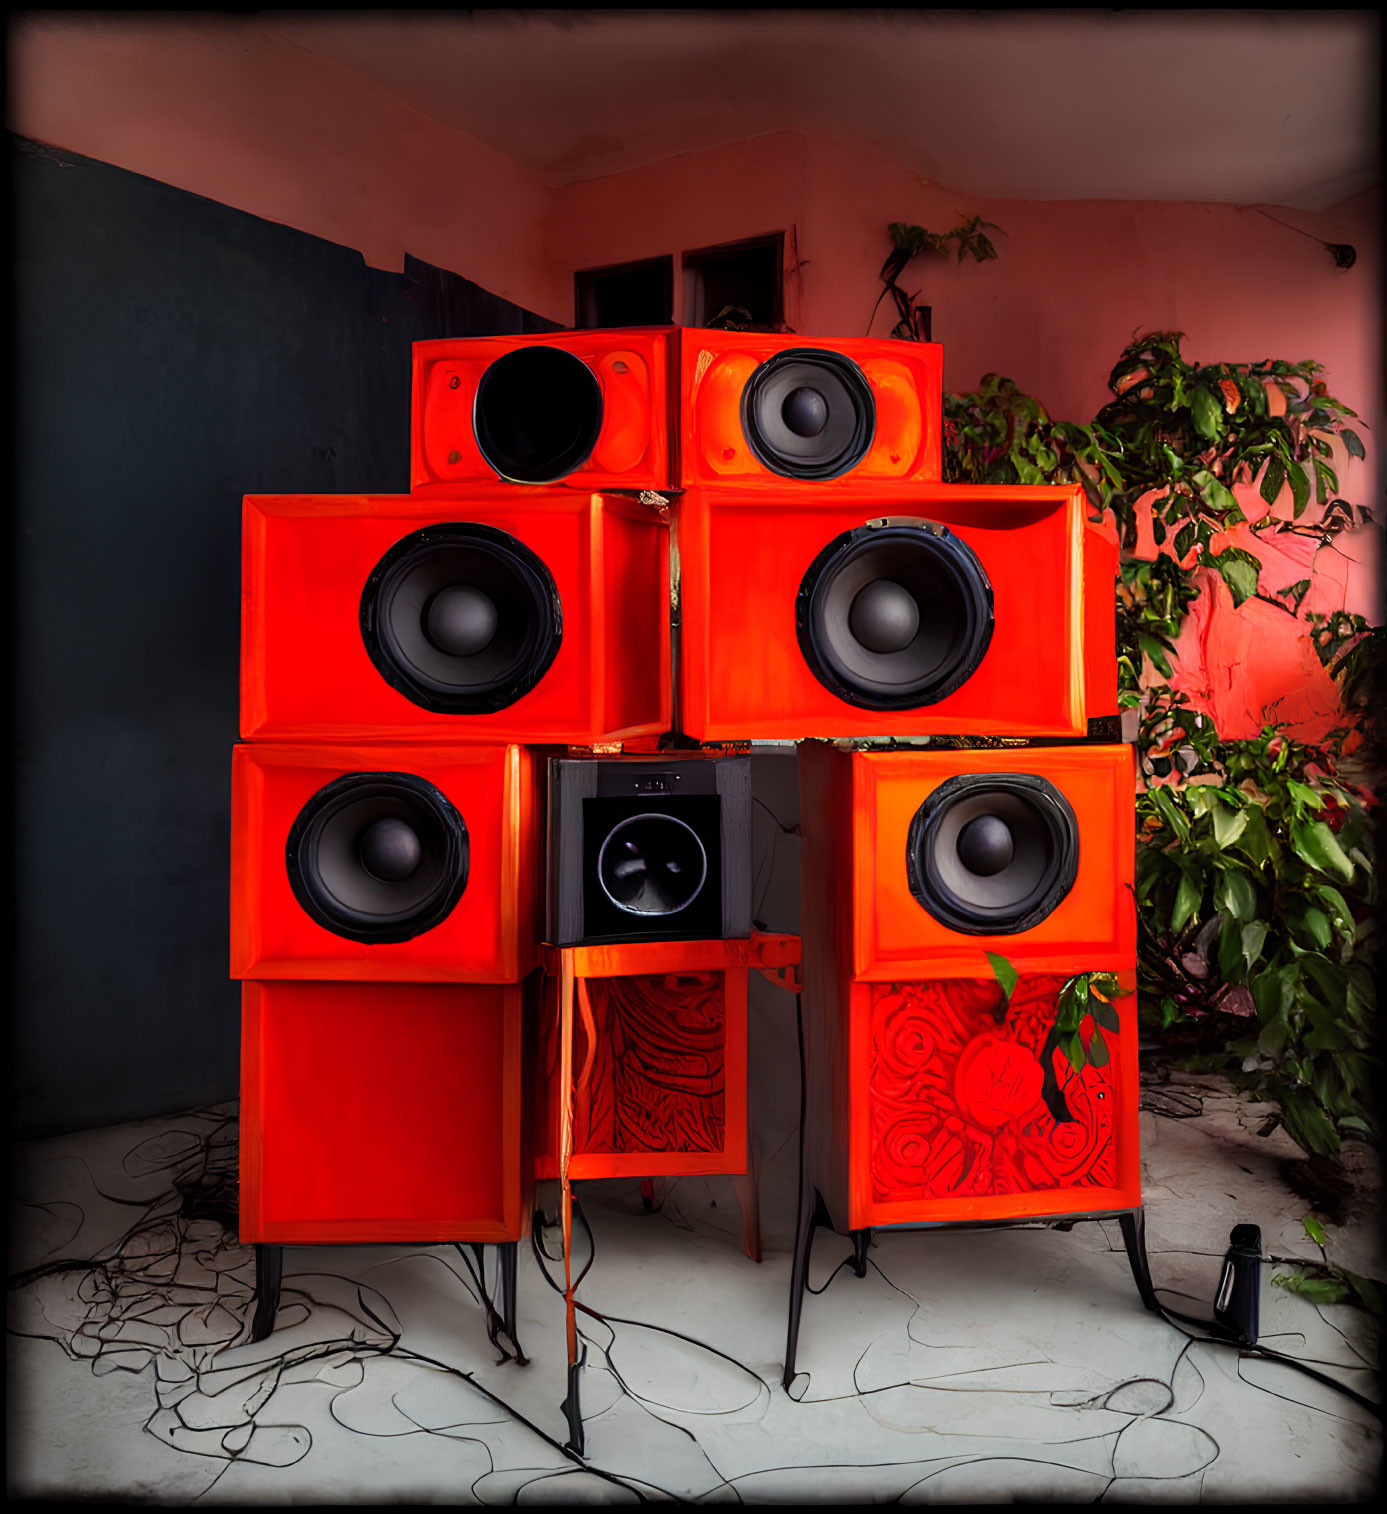 Colorful Red Speakers with Woofers in Room with Pink Walls